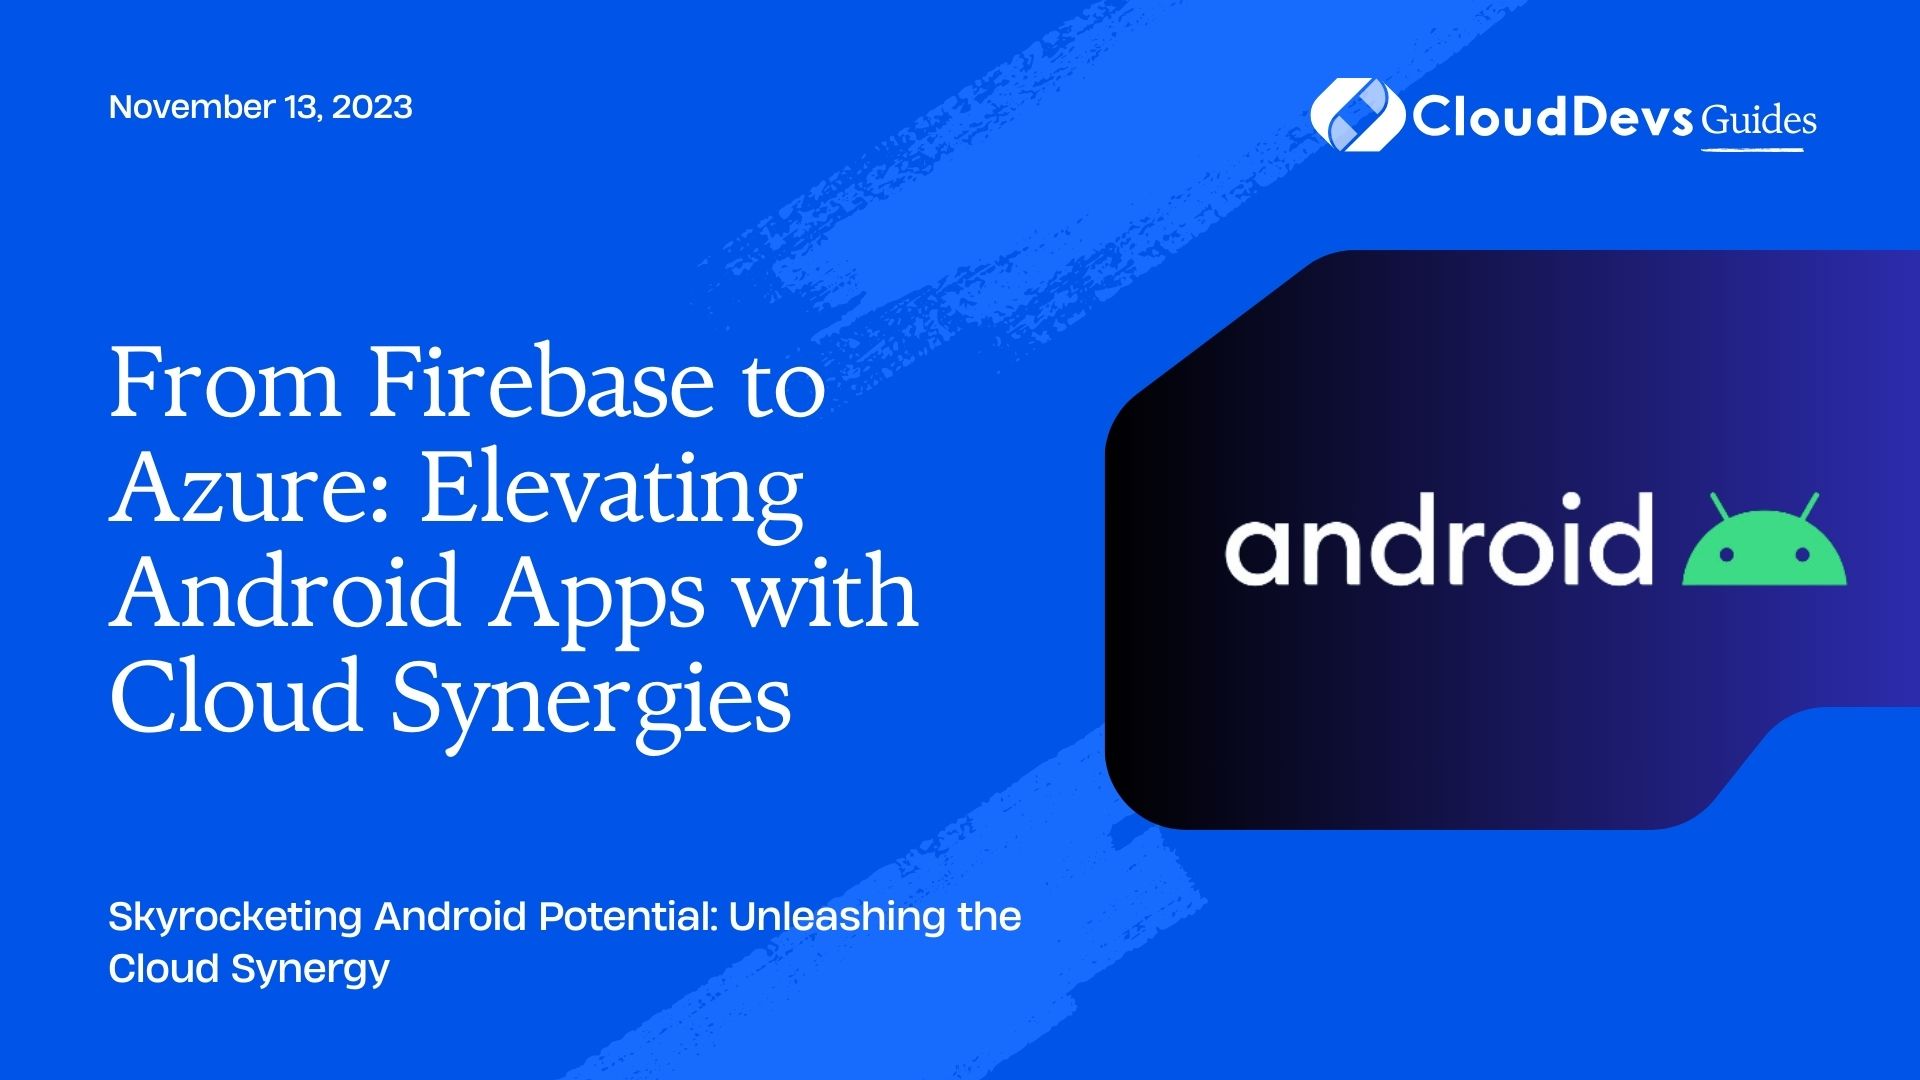 From Firebase to Azure: Elevating Android Apps with Cloud Synergies